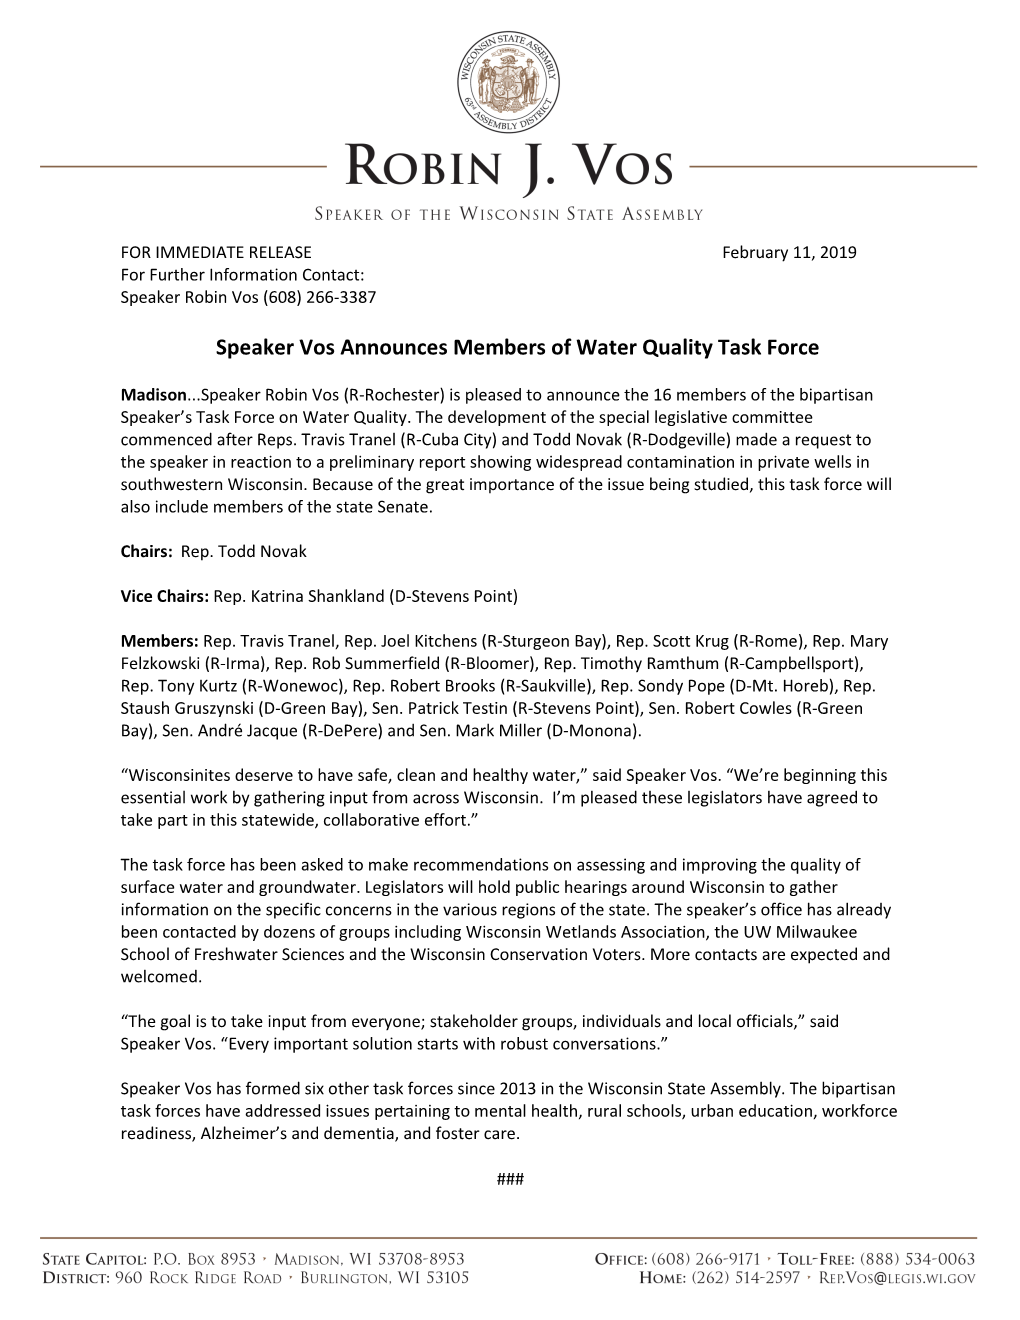 Speaker Vos Announces Members of Water Quality Task Force